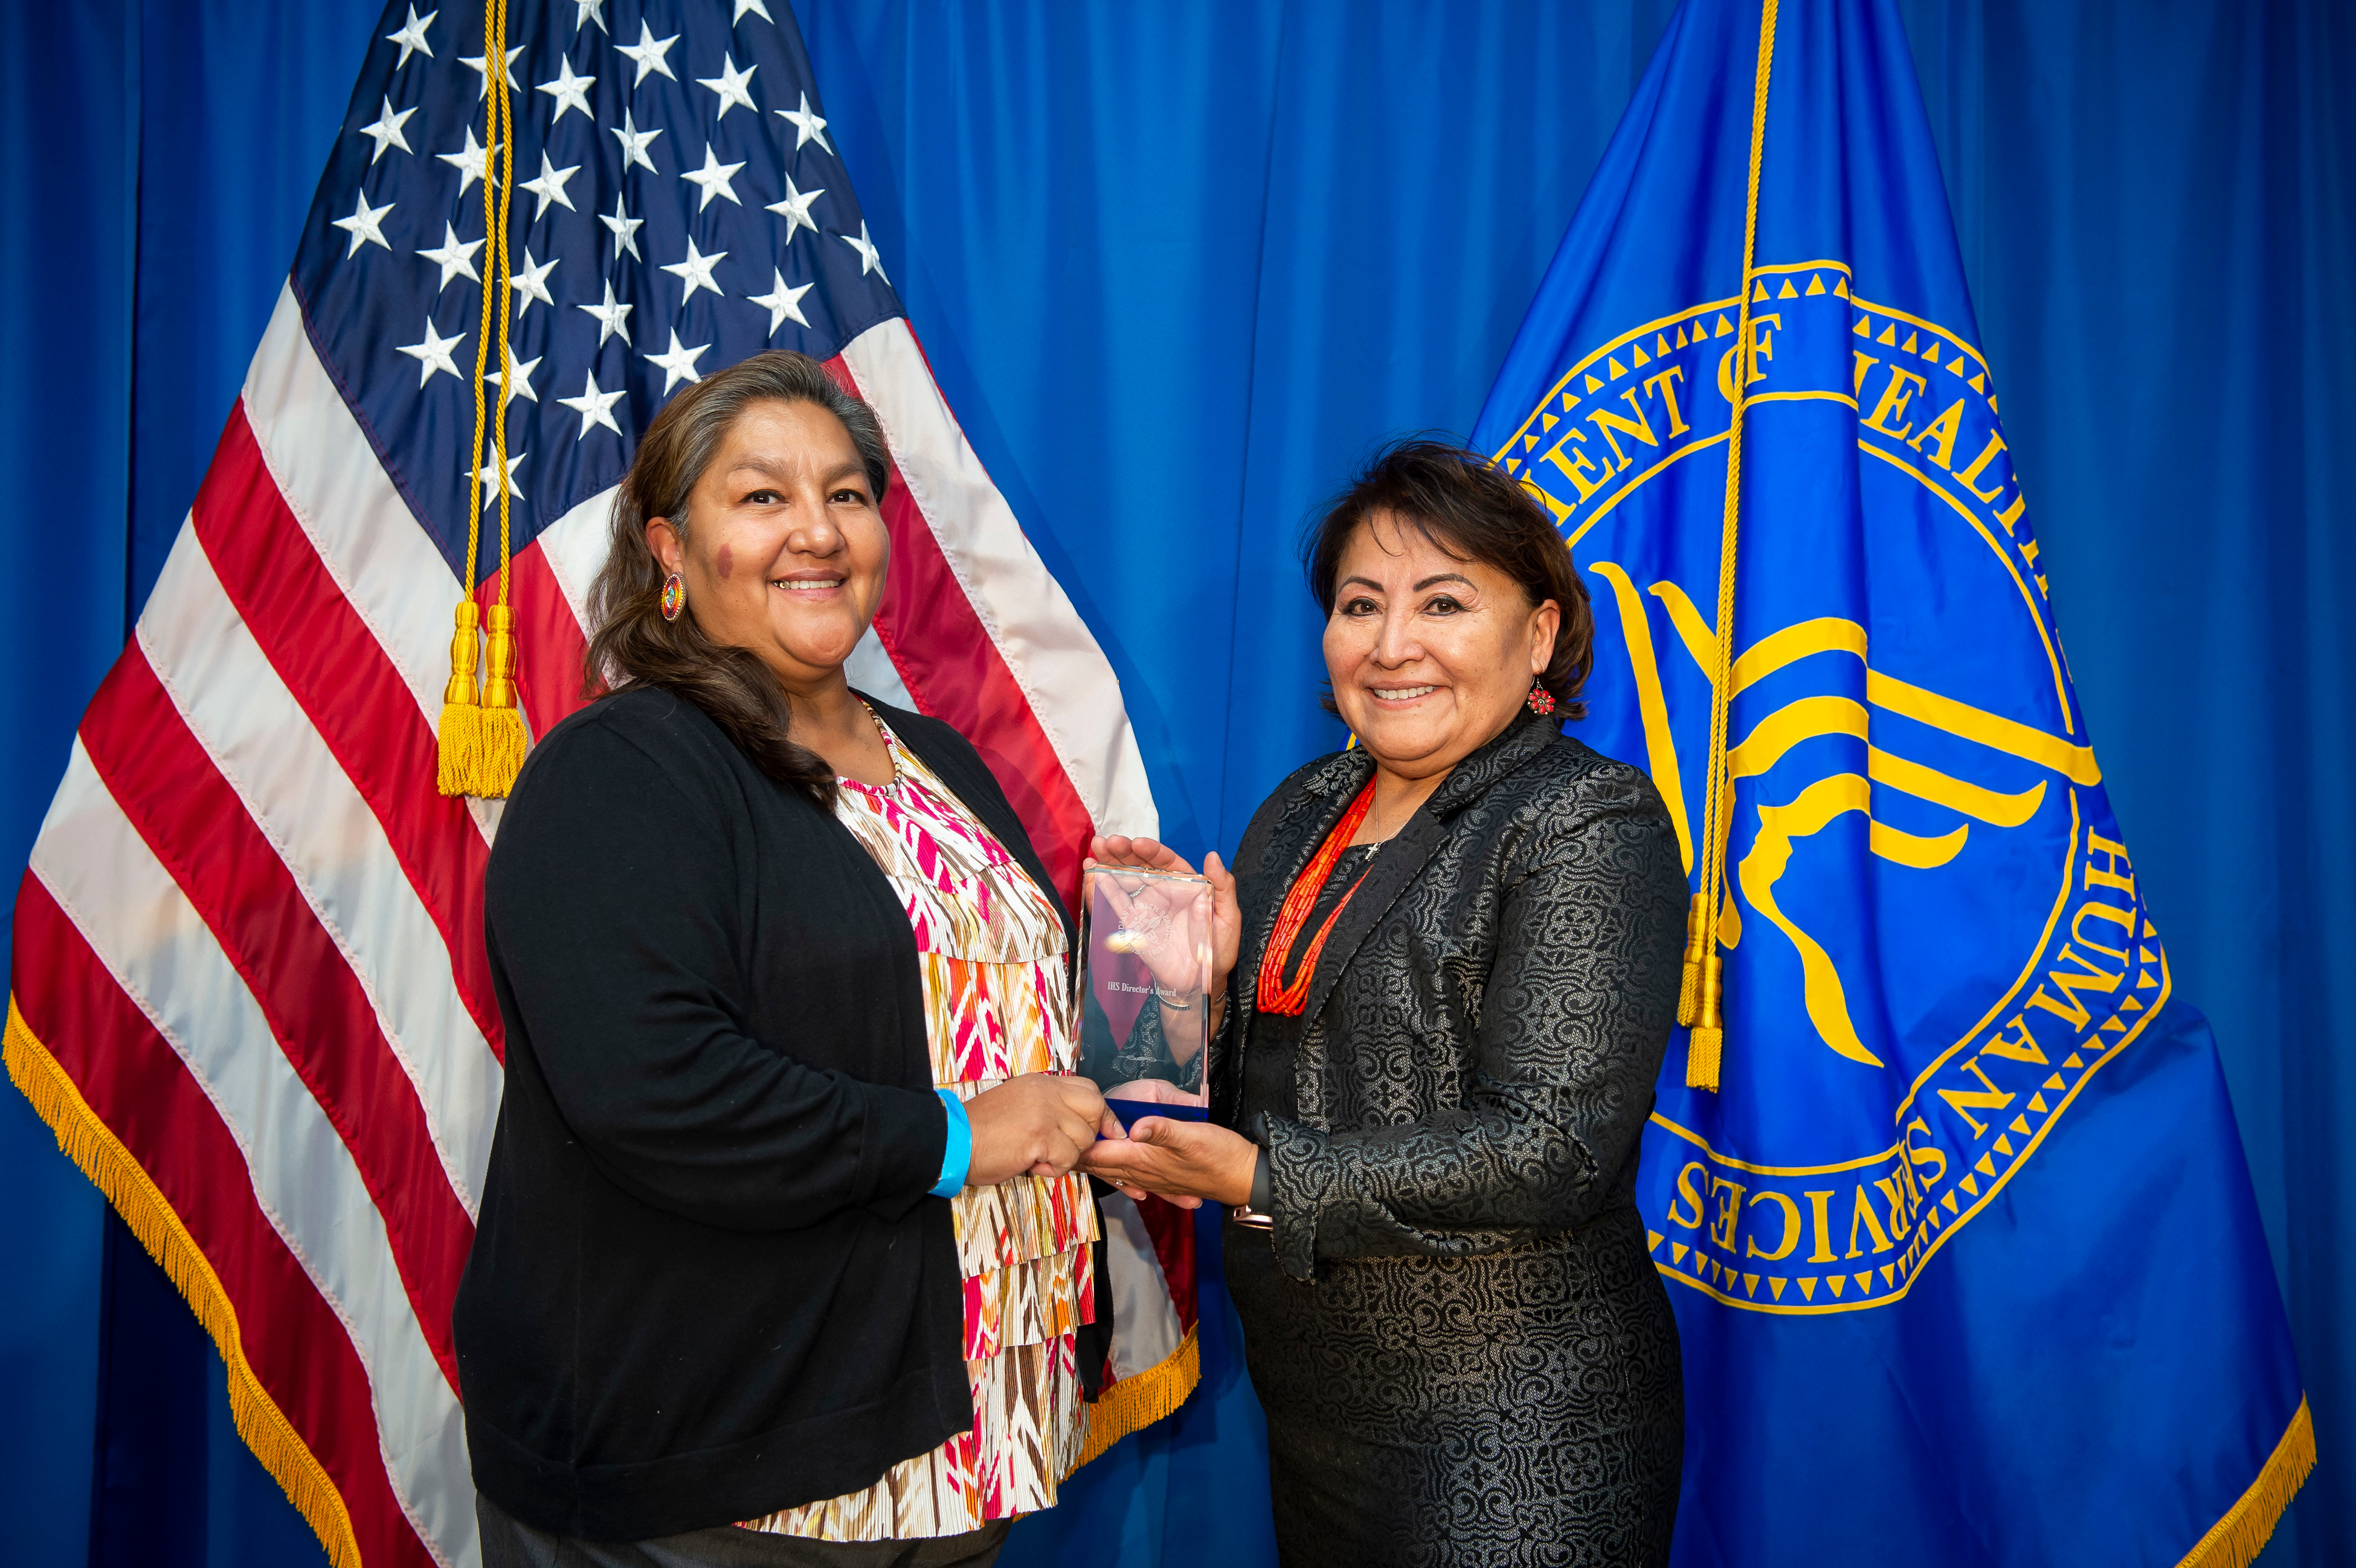 Customer Service - Team Category - Elizabeth Moss receiving on behalf of Collaborative COVID-19 Support of Fort Hall Indian Reservation (Portland )